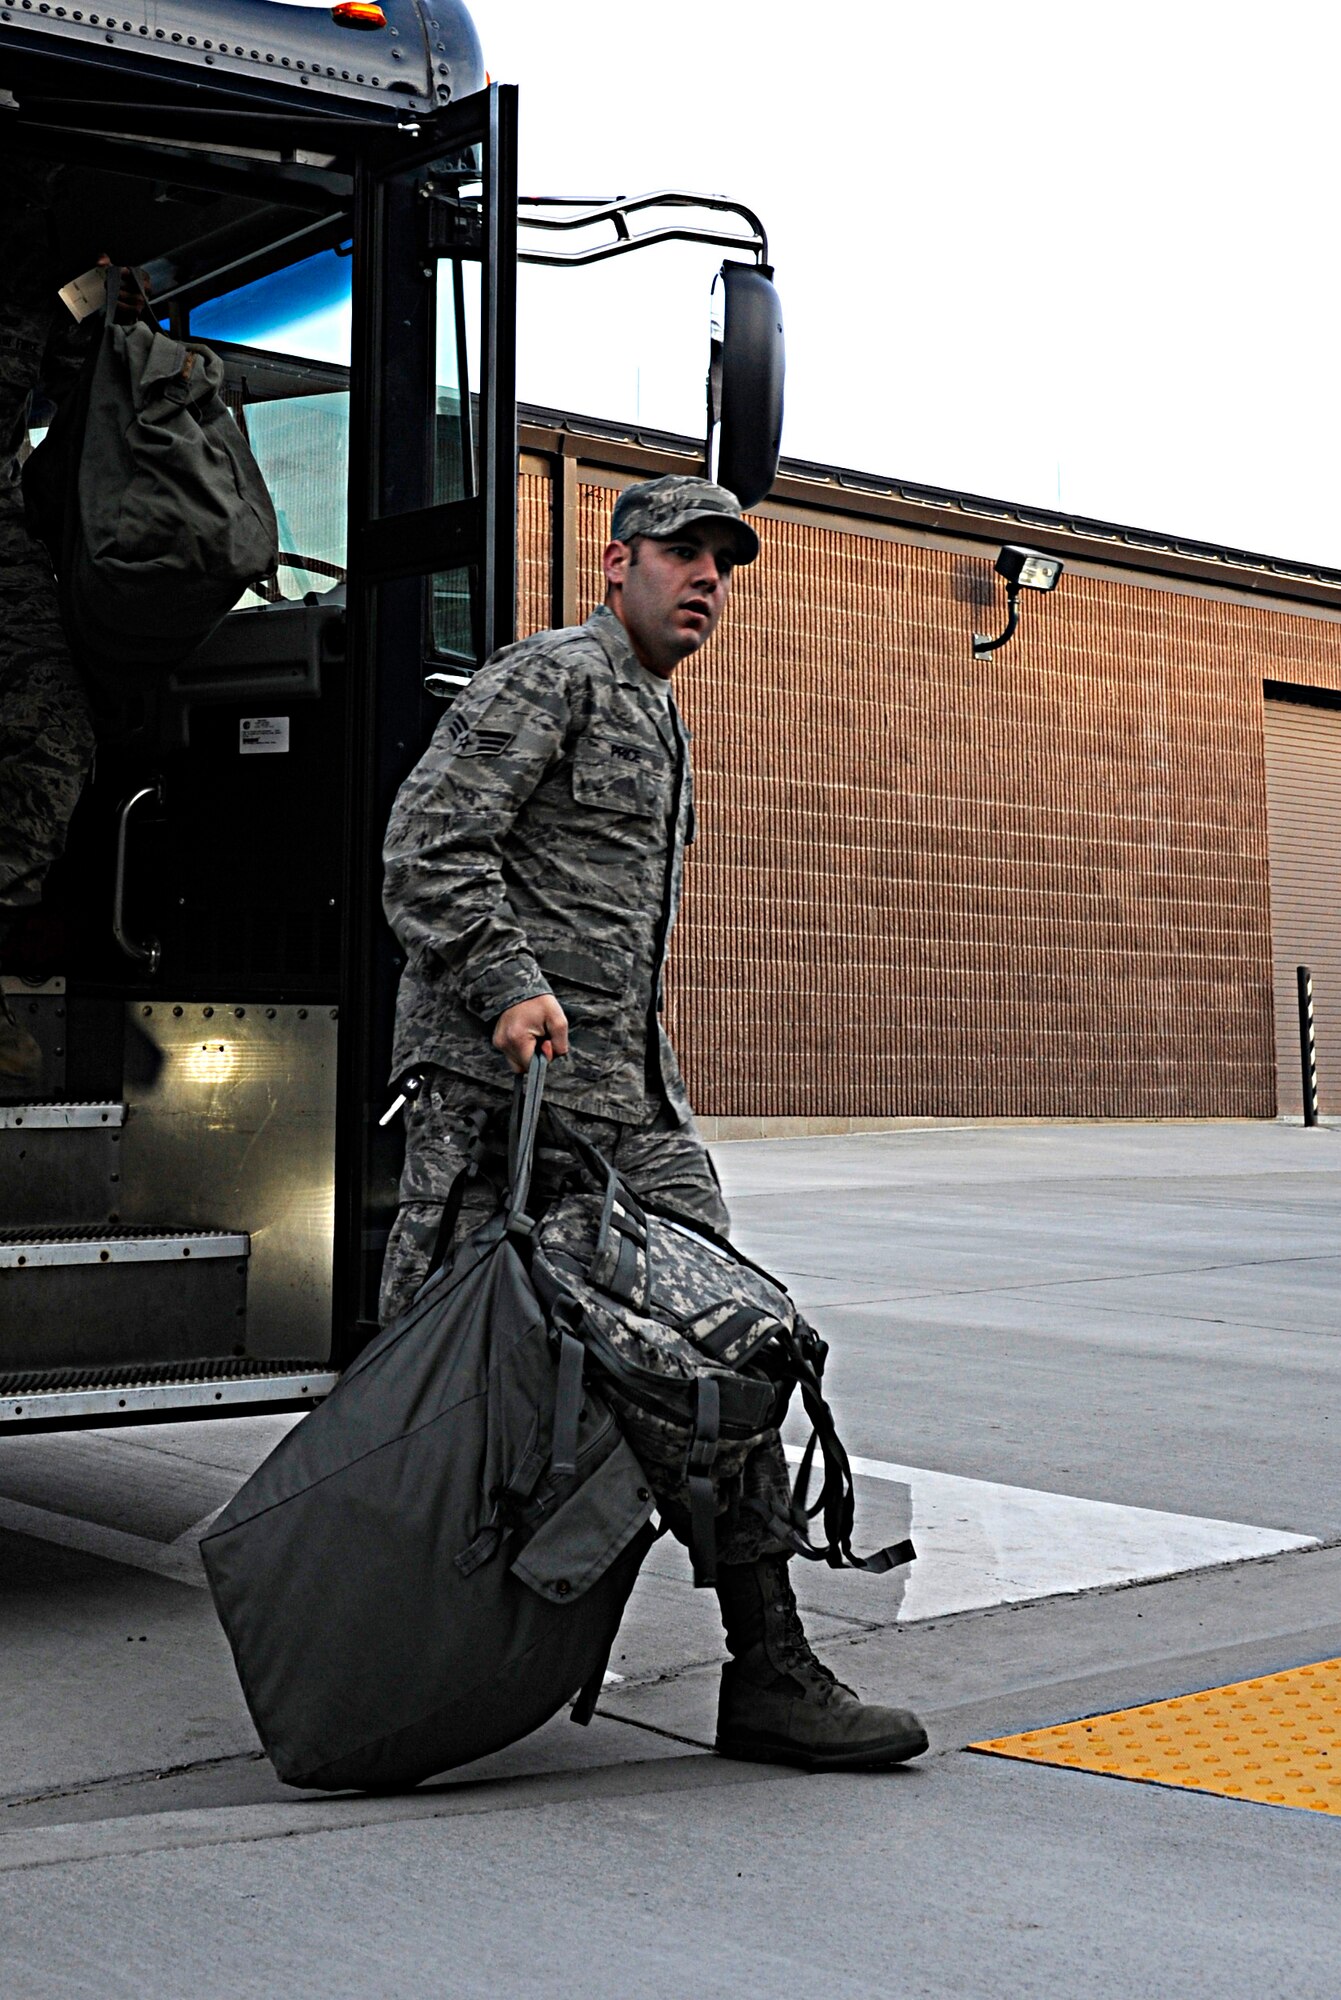 Senior Airman Alex Price, 28th Civil Engineer Squadron electrical systems technician, exits a bus during a 28th Mission Support Group deployment readiness exercise outside the Deployment Center at Ellsworth Air Force Base, S.D., Dec. 14, 2012. The 28th MSG conducts monthly exercises to ensure its Airmen are in a constant state of combat readiness. (U.S. Air Force photo by Airman Ashley J. Woolridge/Released) 